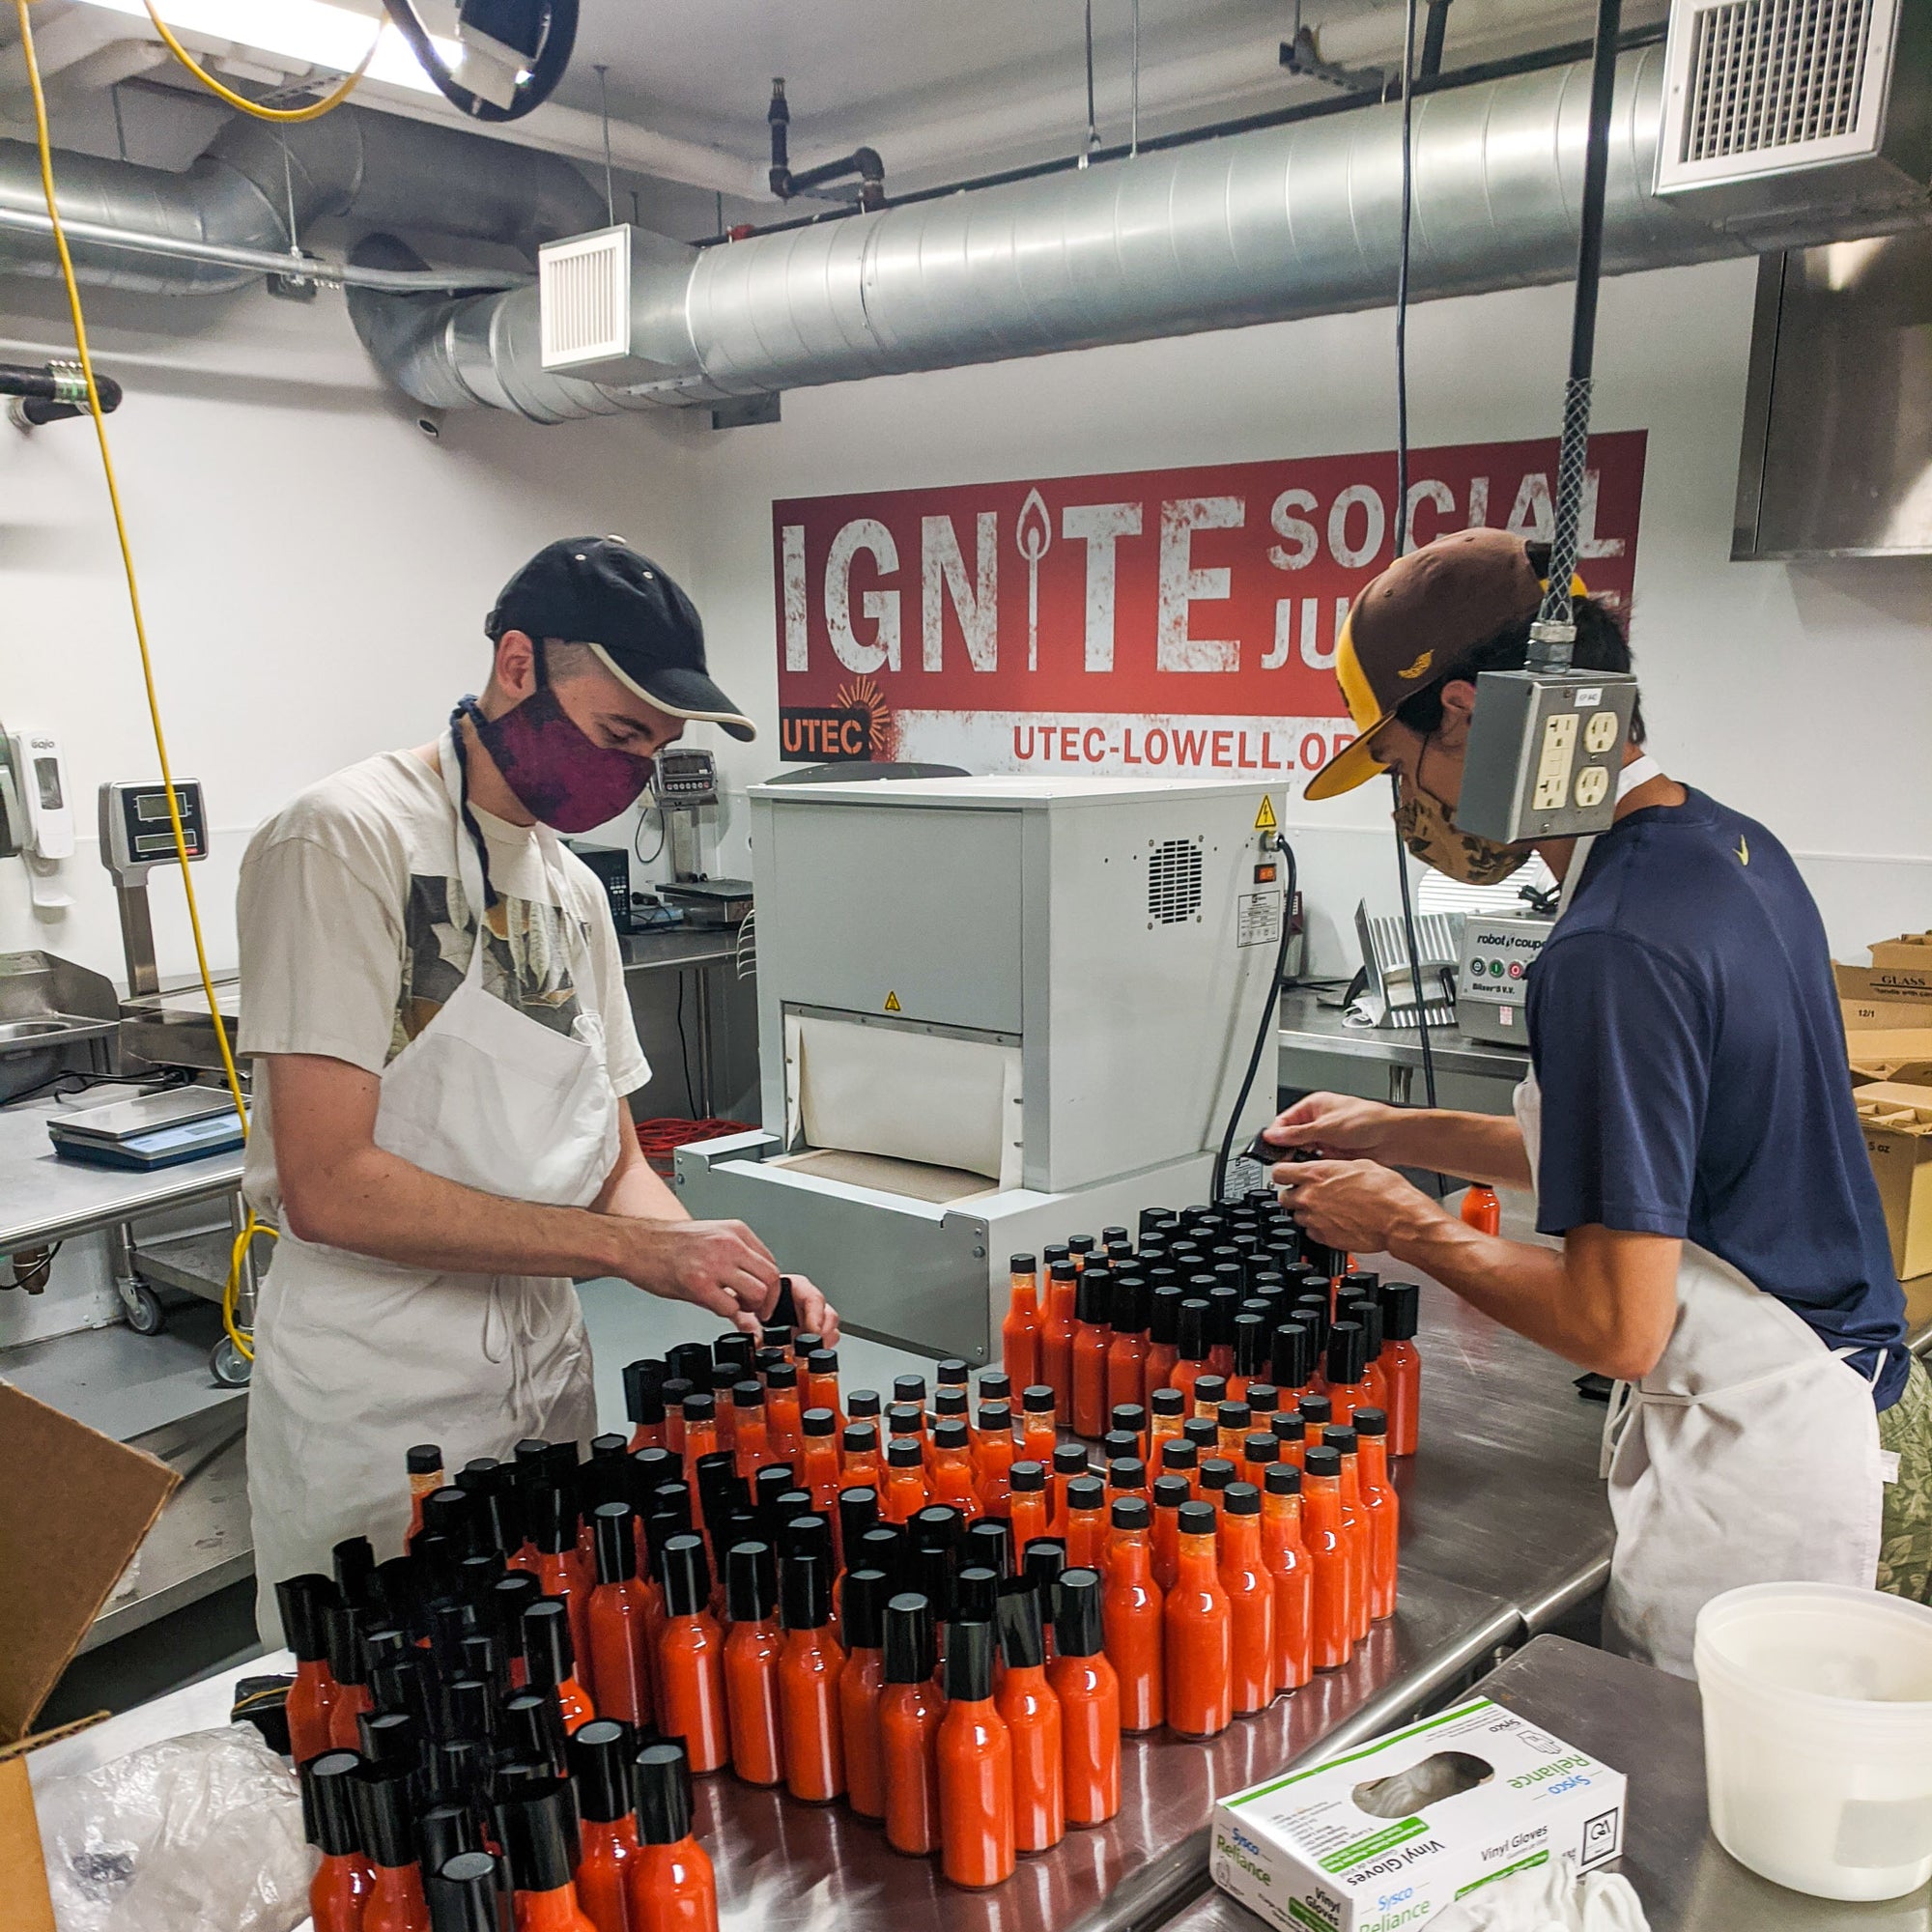 journey of getting hot sauce certified and into stores